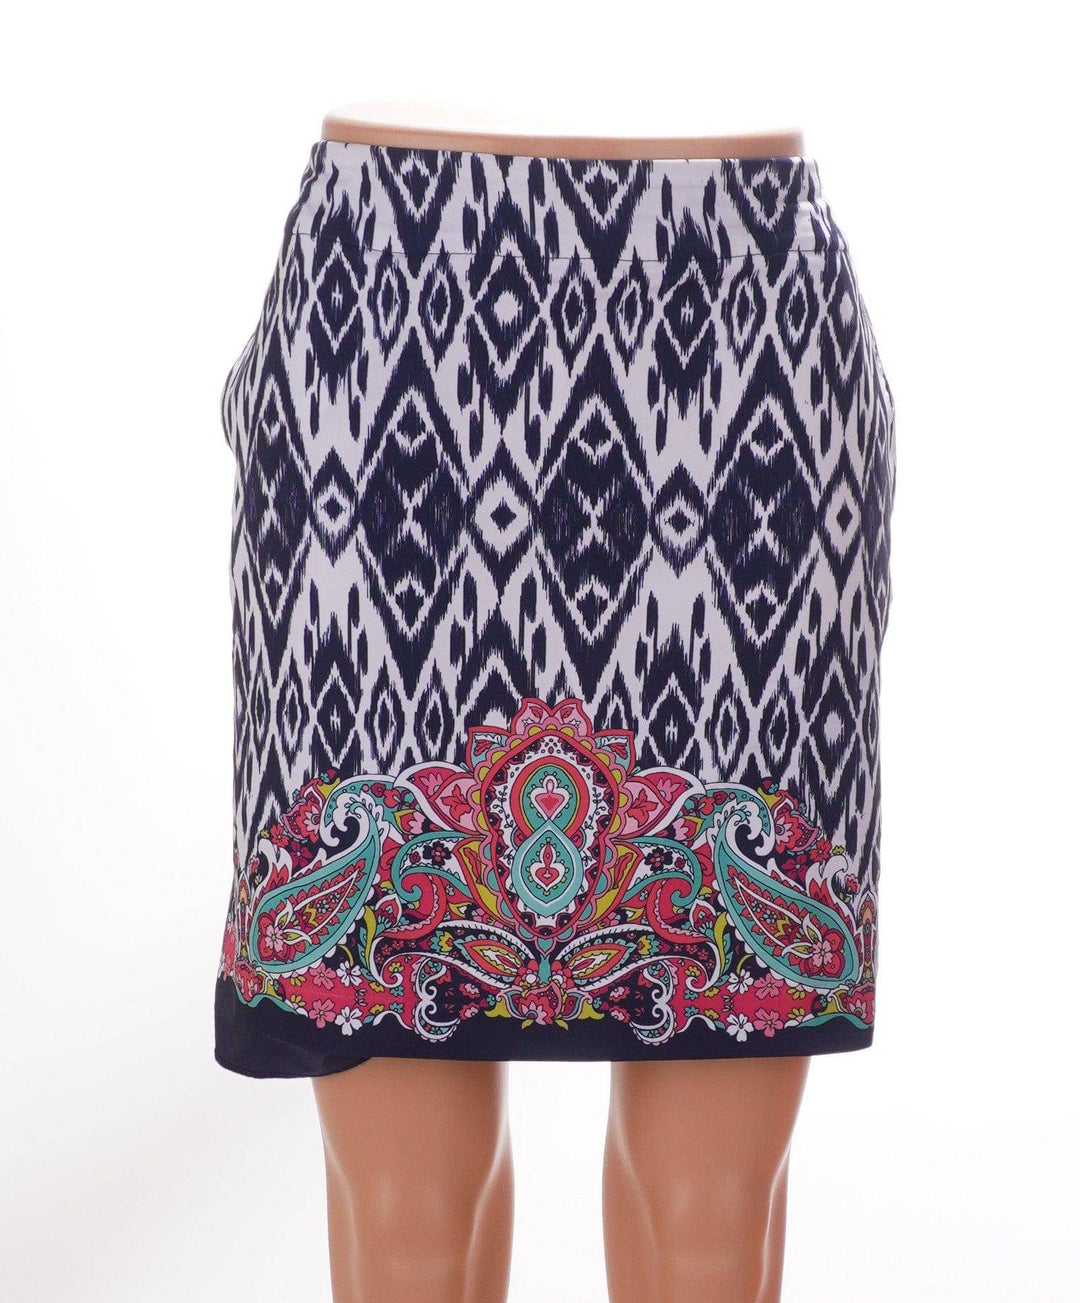 EP Pro Small / Navy / Consigned EP Pro Multi Pattern Skort - Size Small